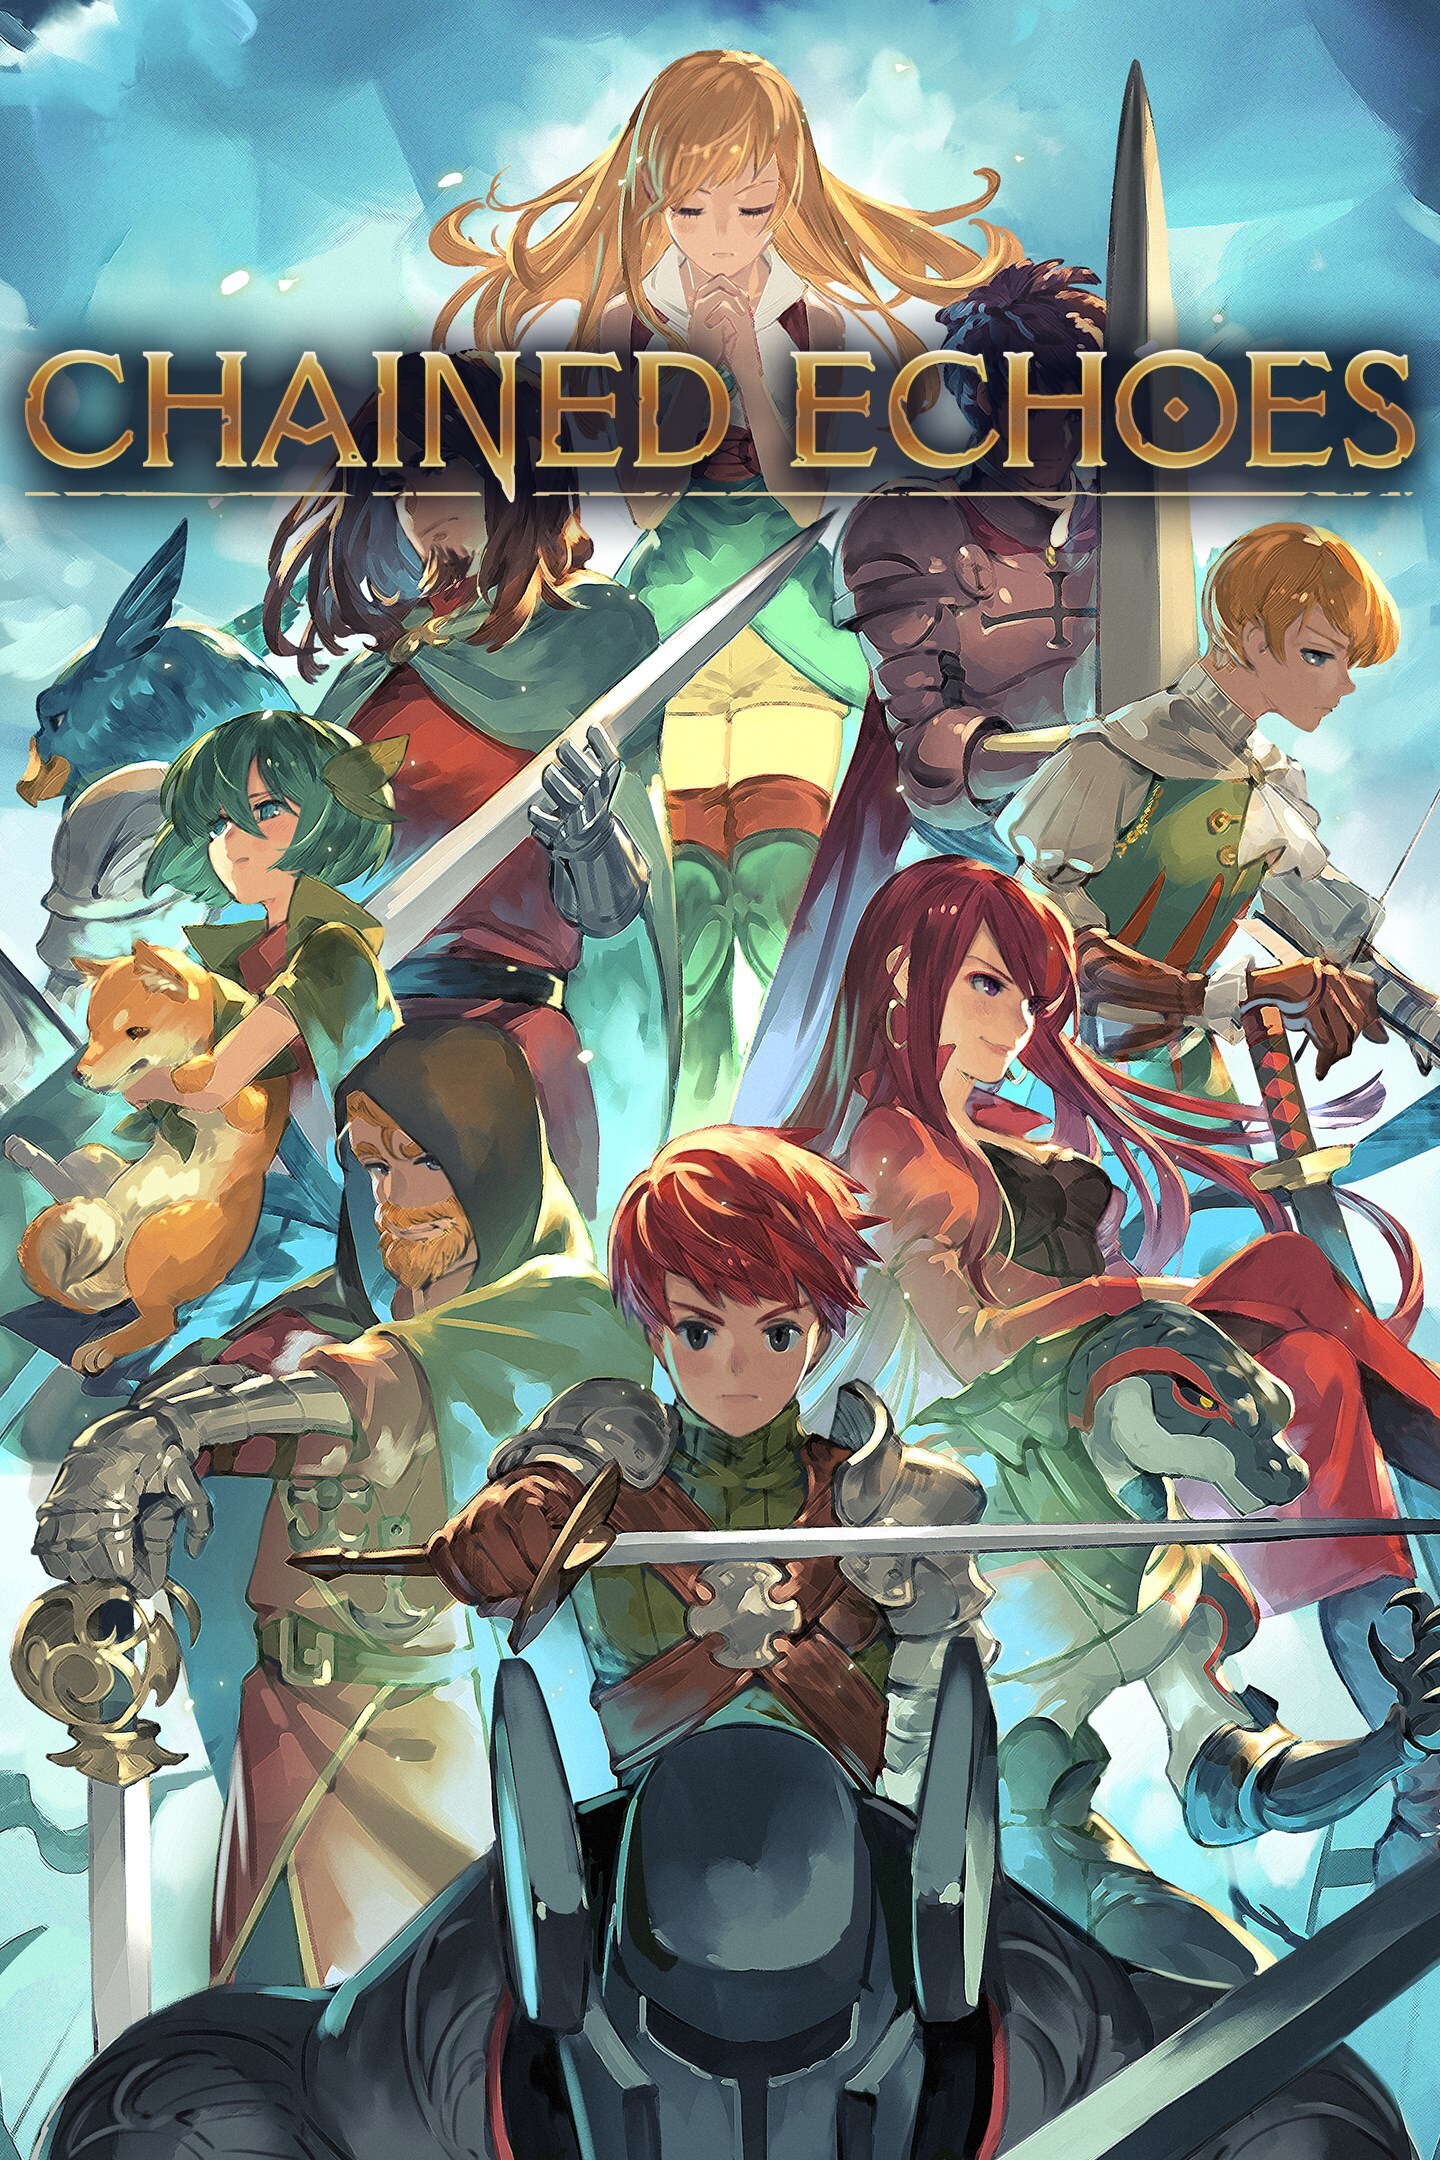 Chained Echoes Videos for Xbox One - GameFAQs